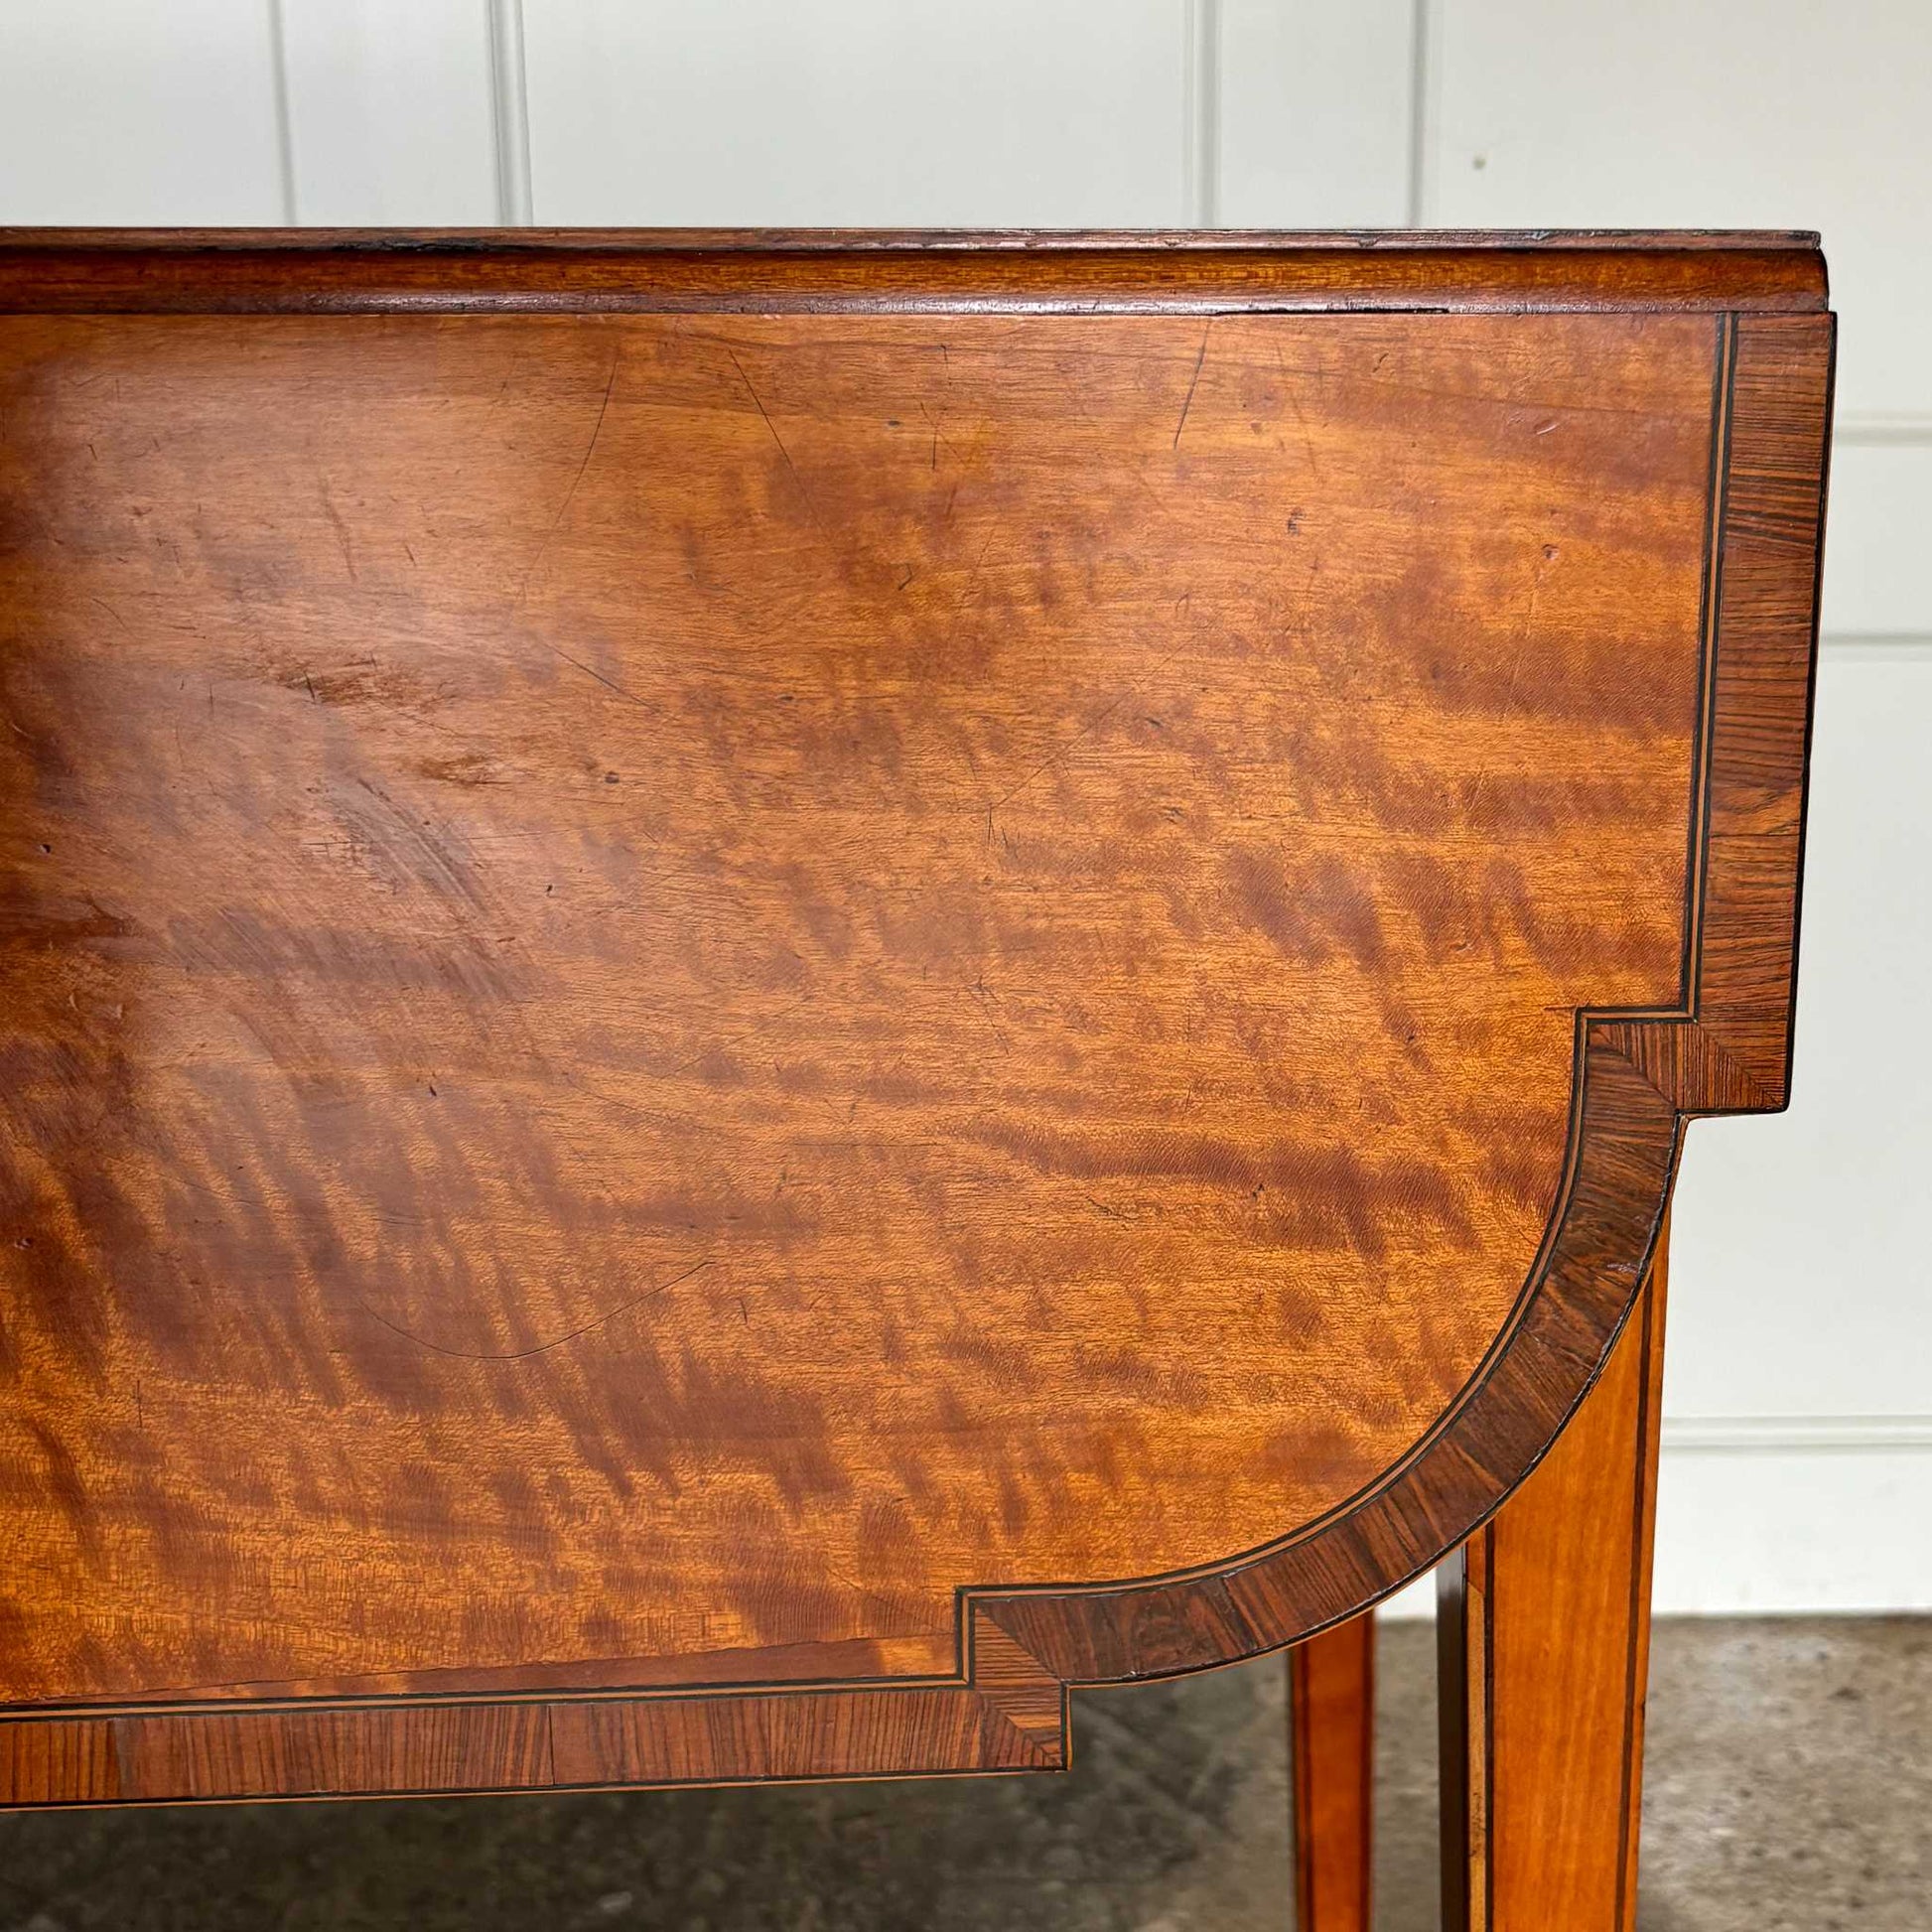 A lovely George III satinwood Pembroke table, the shaped drop leaf top with elegant crossbanding above a single end drawer with a dummy drawer on the opposing side, raised on gently tapering square legs with delicate inlay detailing over brass castors, with some gentle surface patina to the top as is commensurate with age and use, in very good condition